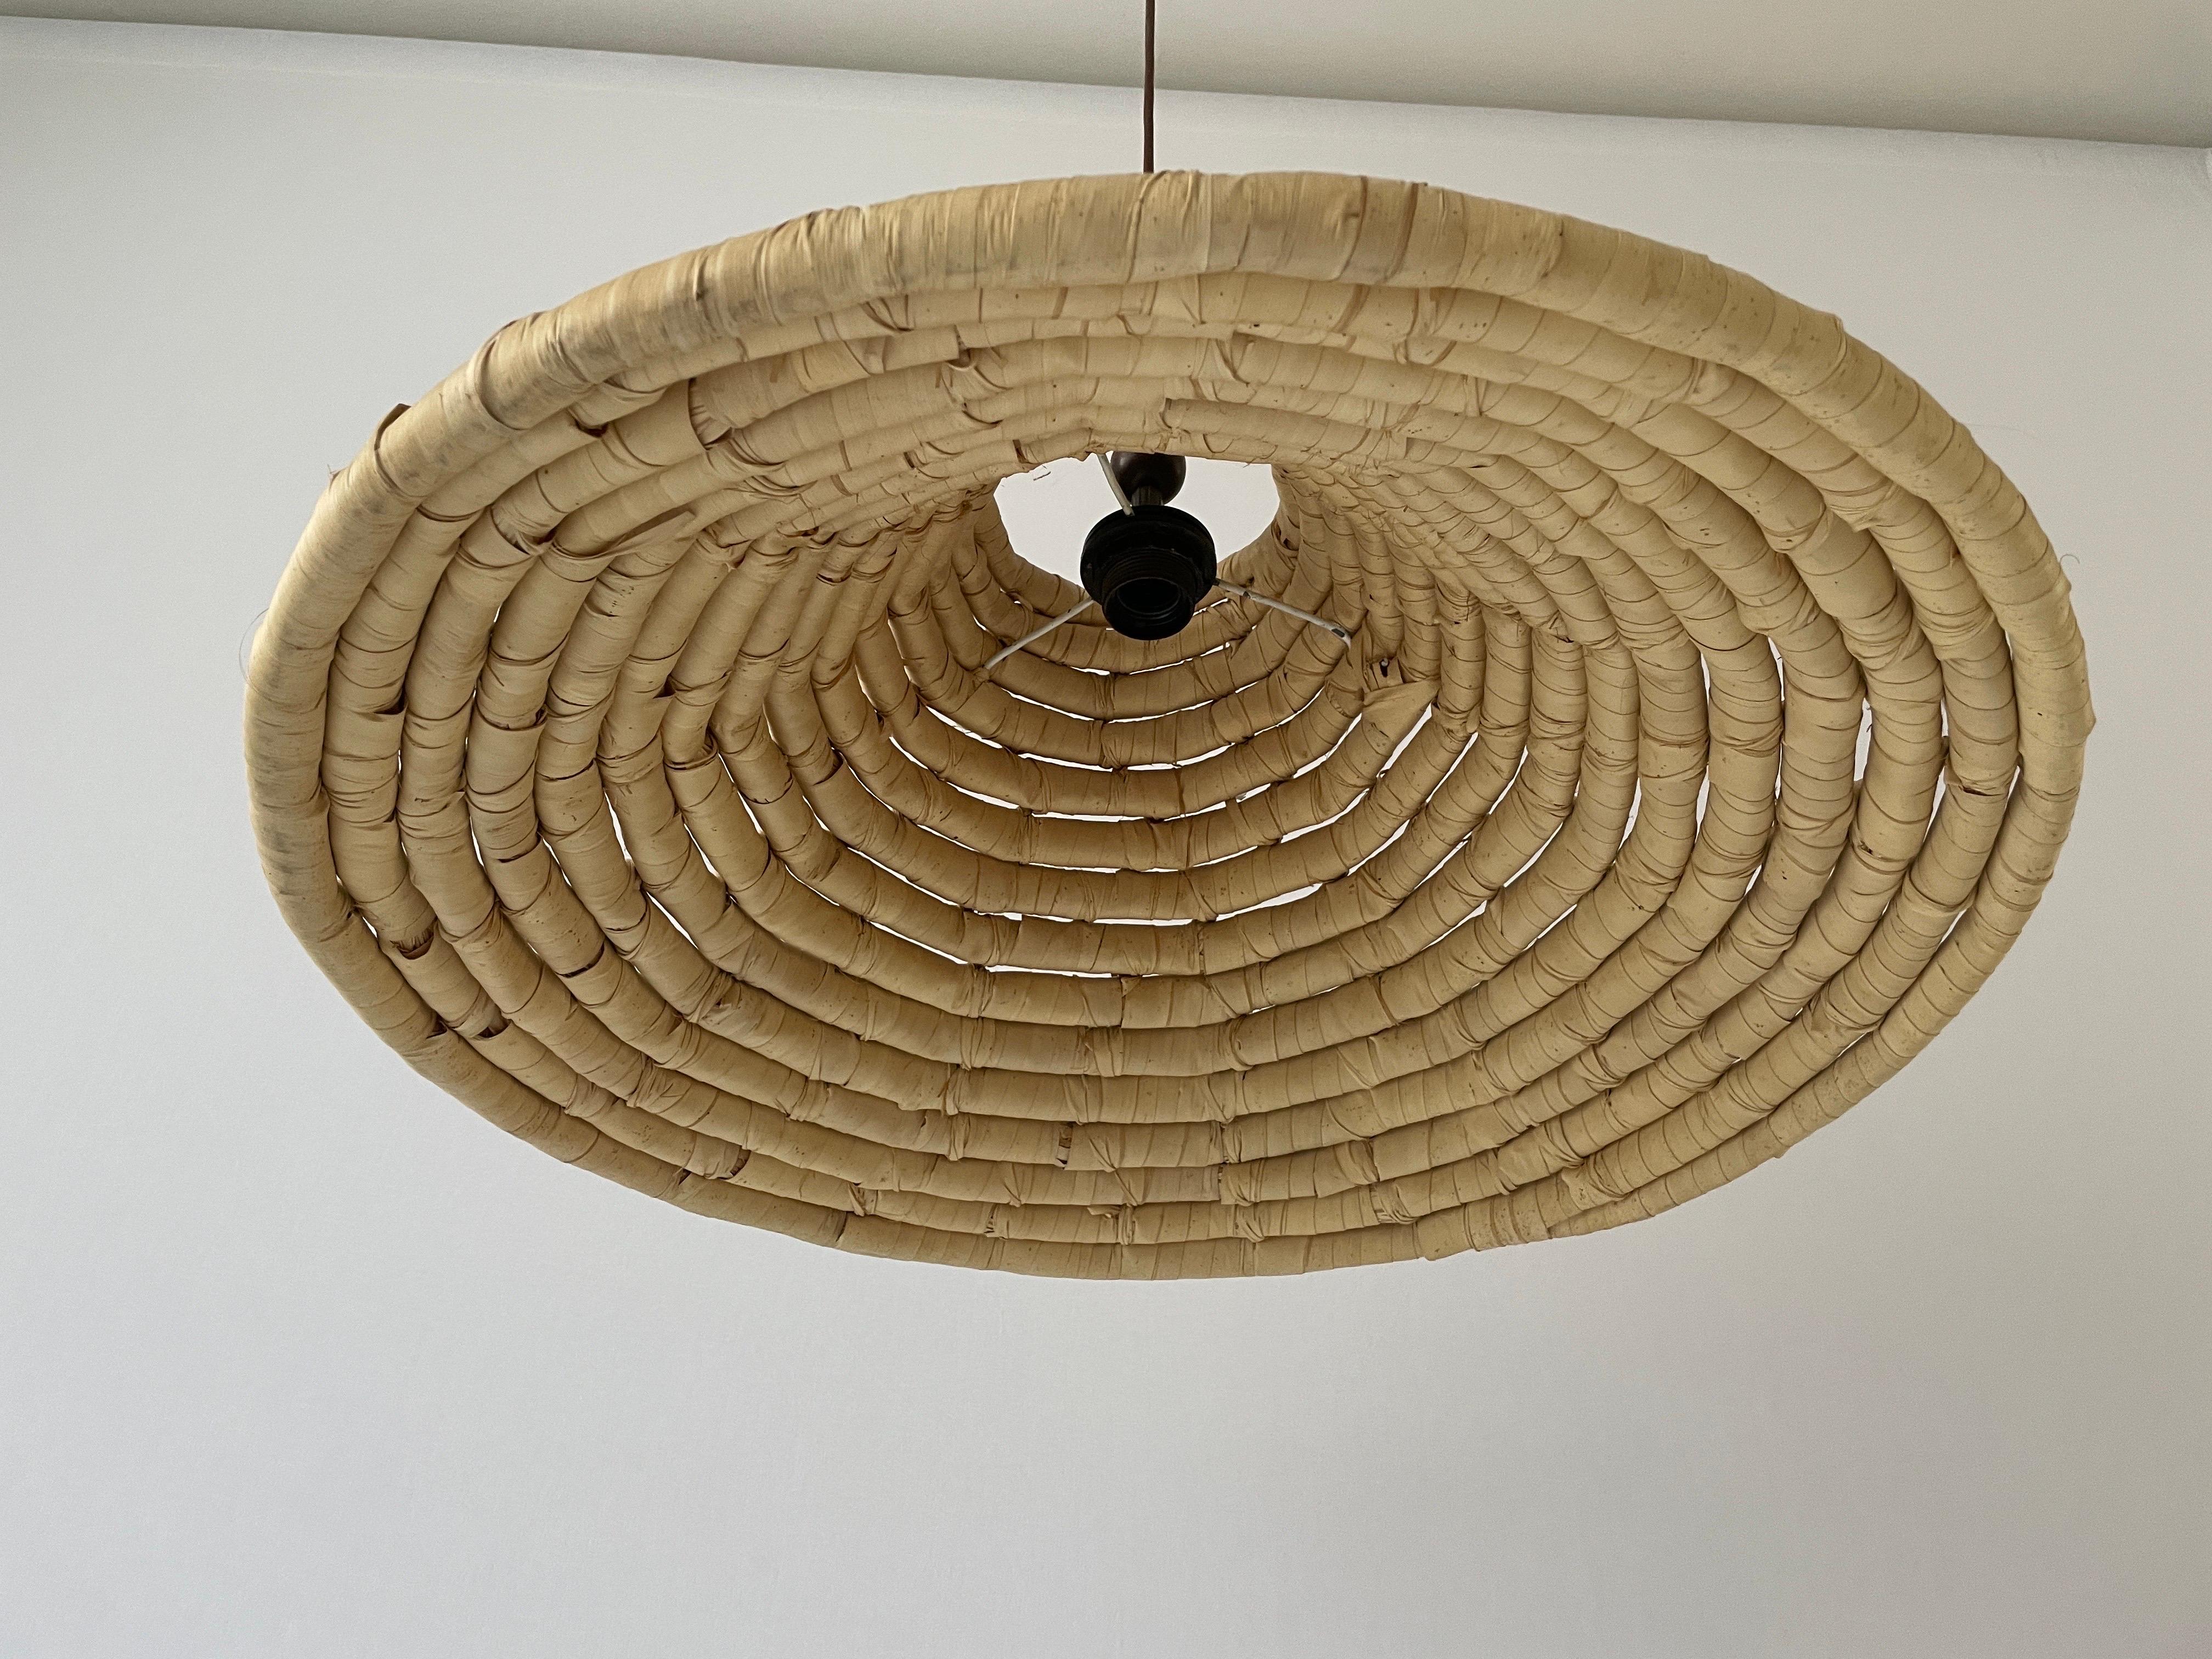 Unusual Large Made of Natural Plant Material Pendant Lamp, 1960s, Germany For Sale 2